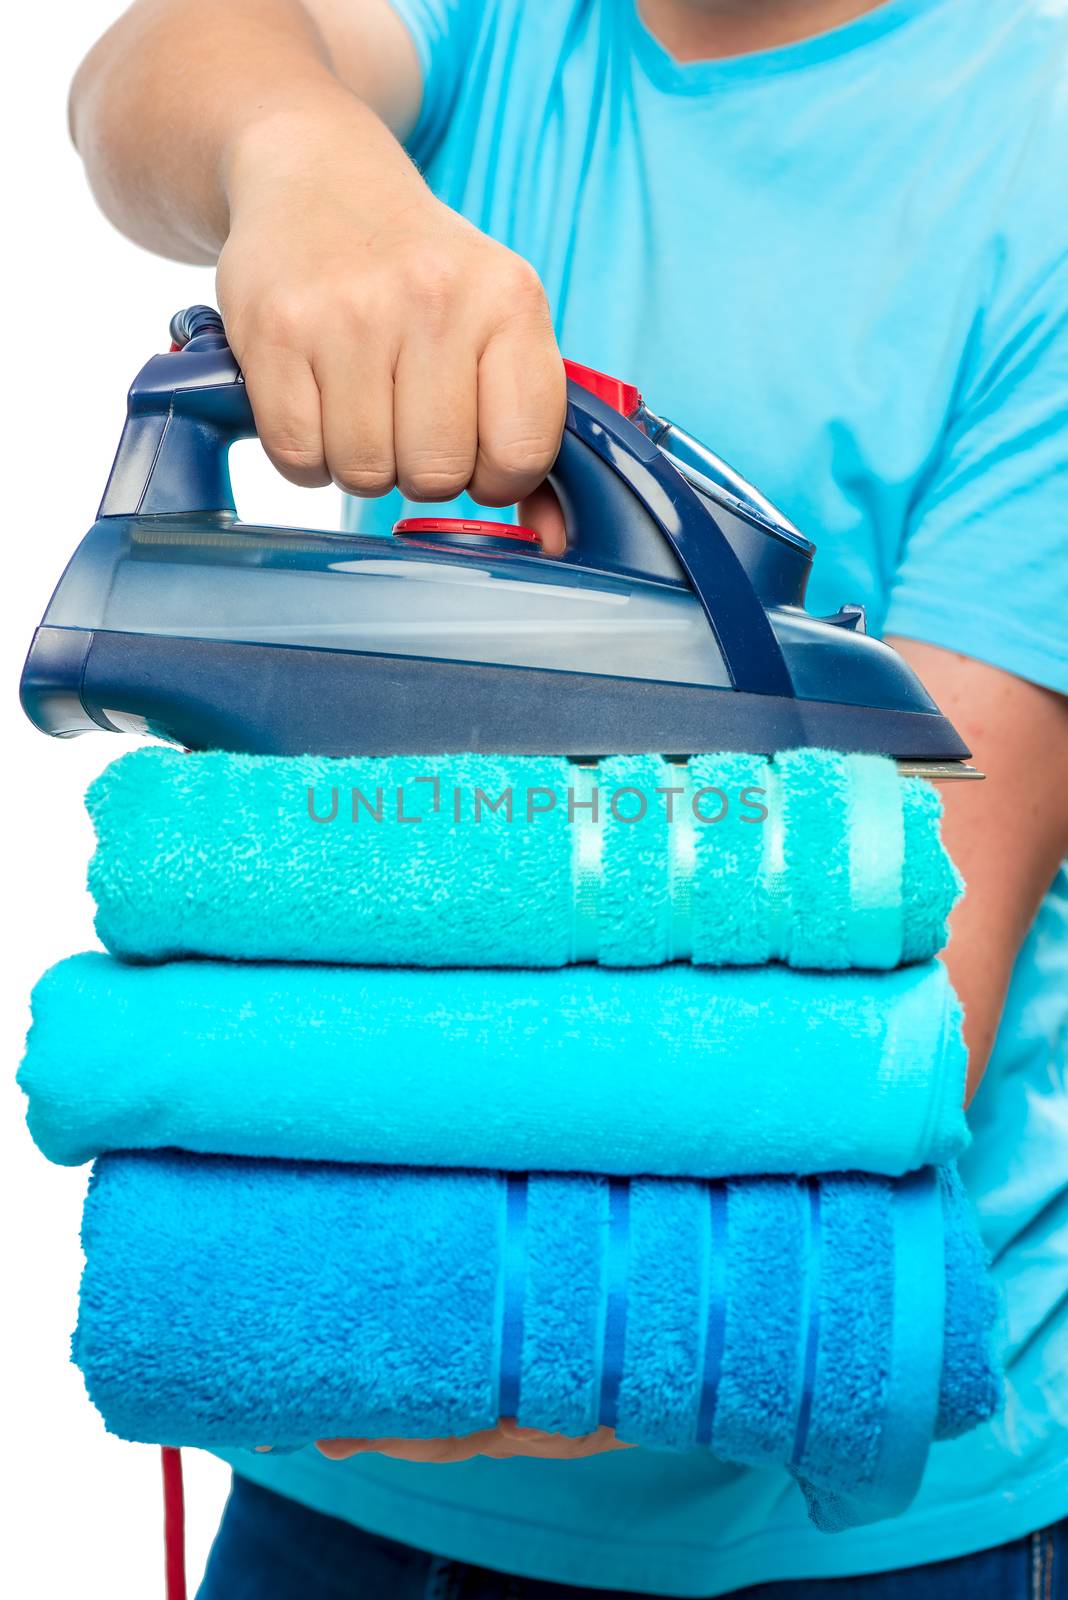 a stack of ironed terry towels and an iron in male hands close-u by kosmsos111